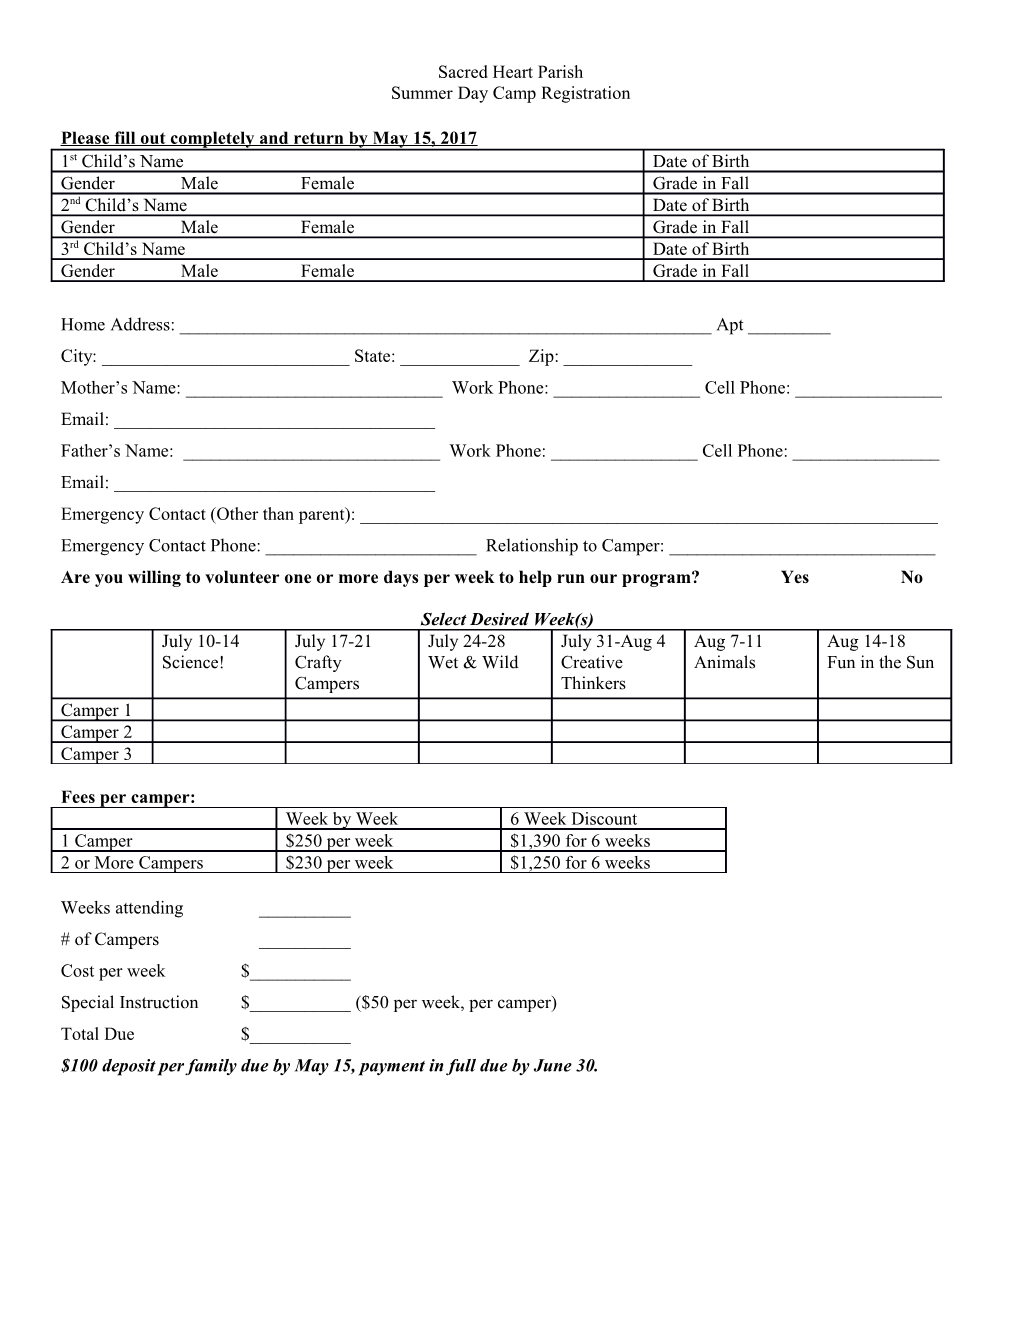 Please Fill out Completely and Return by May 15, 2017